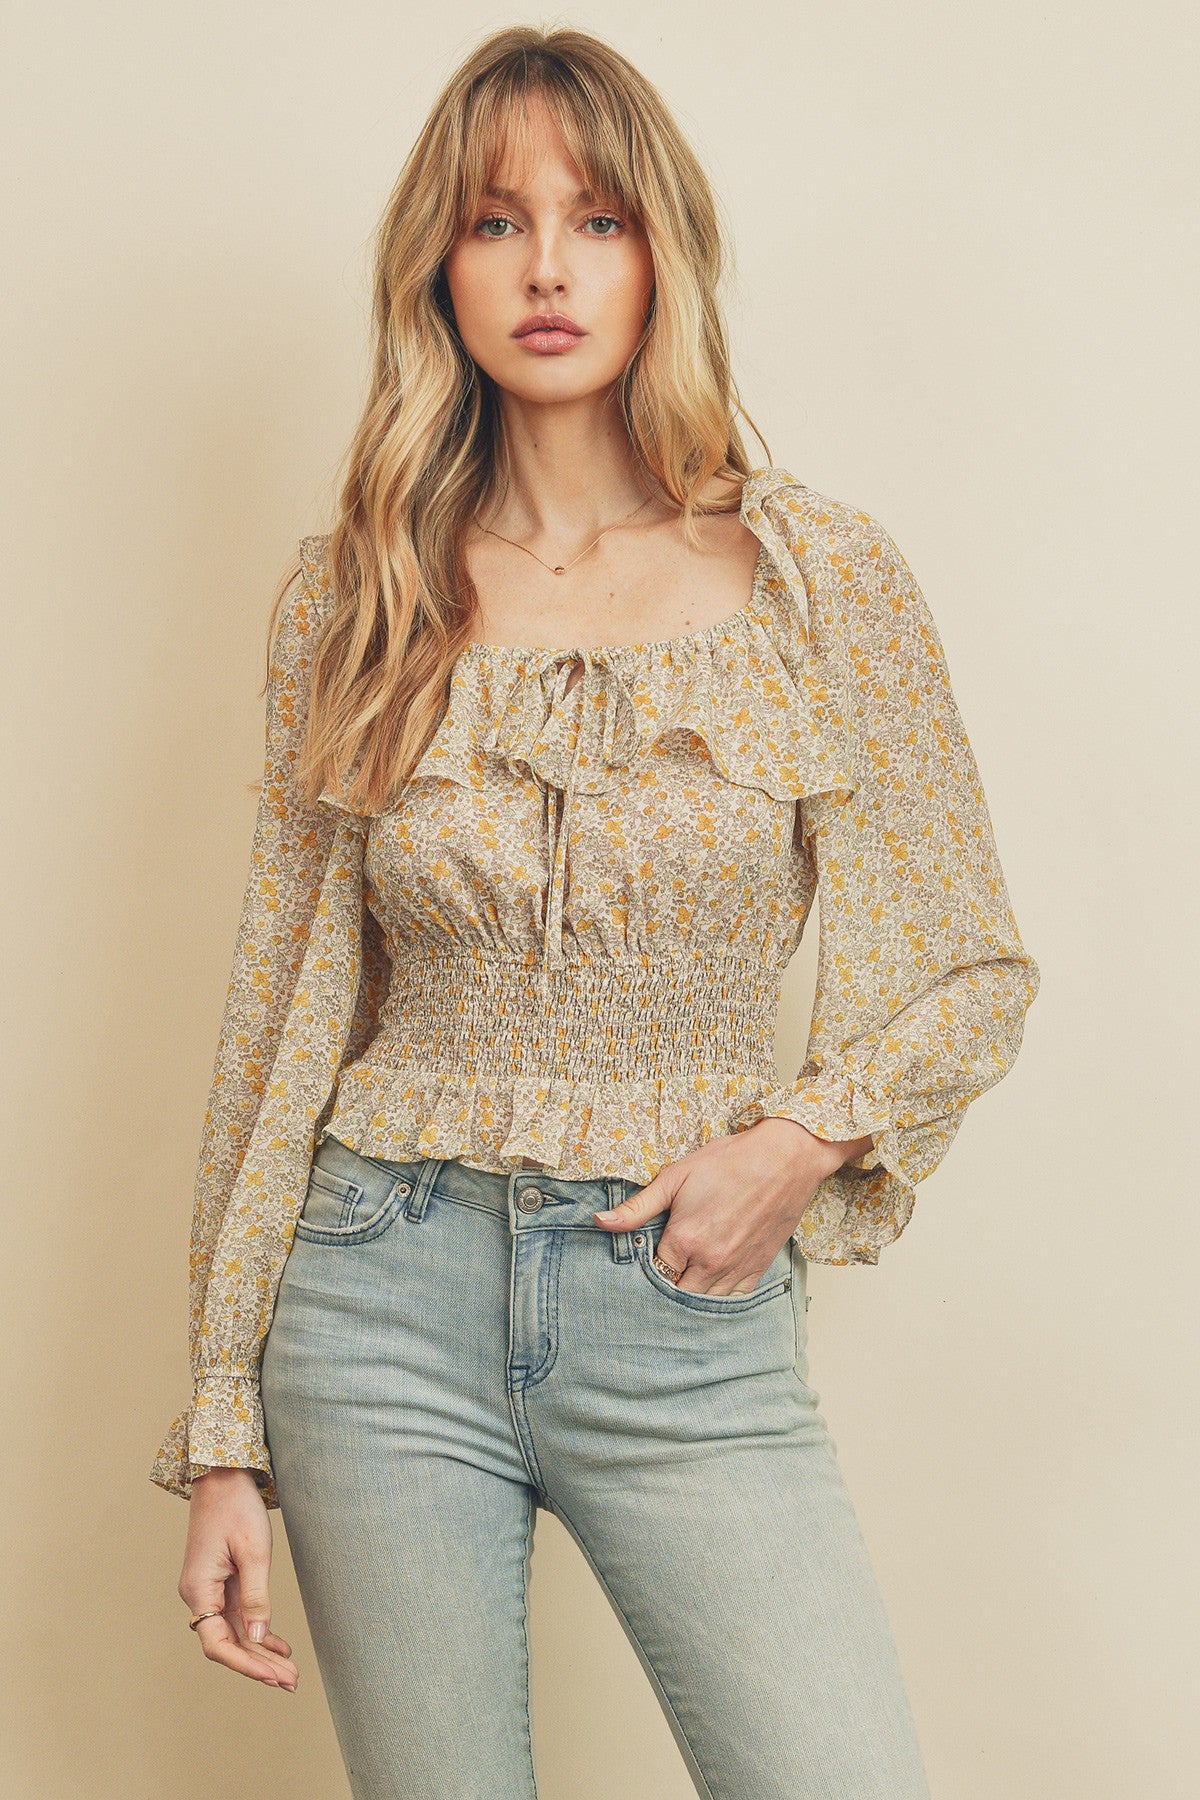 Simply Thriving Top-Marigold